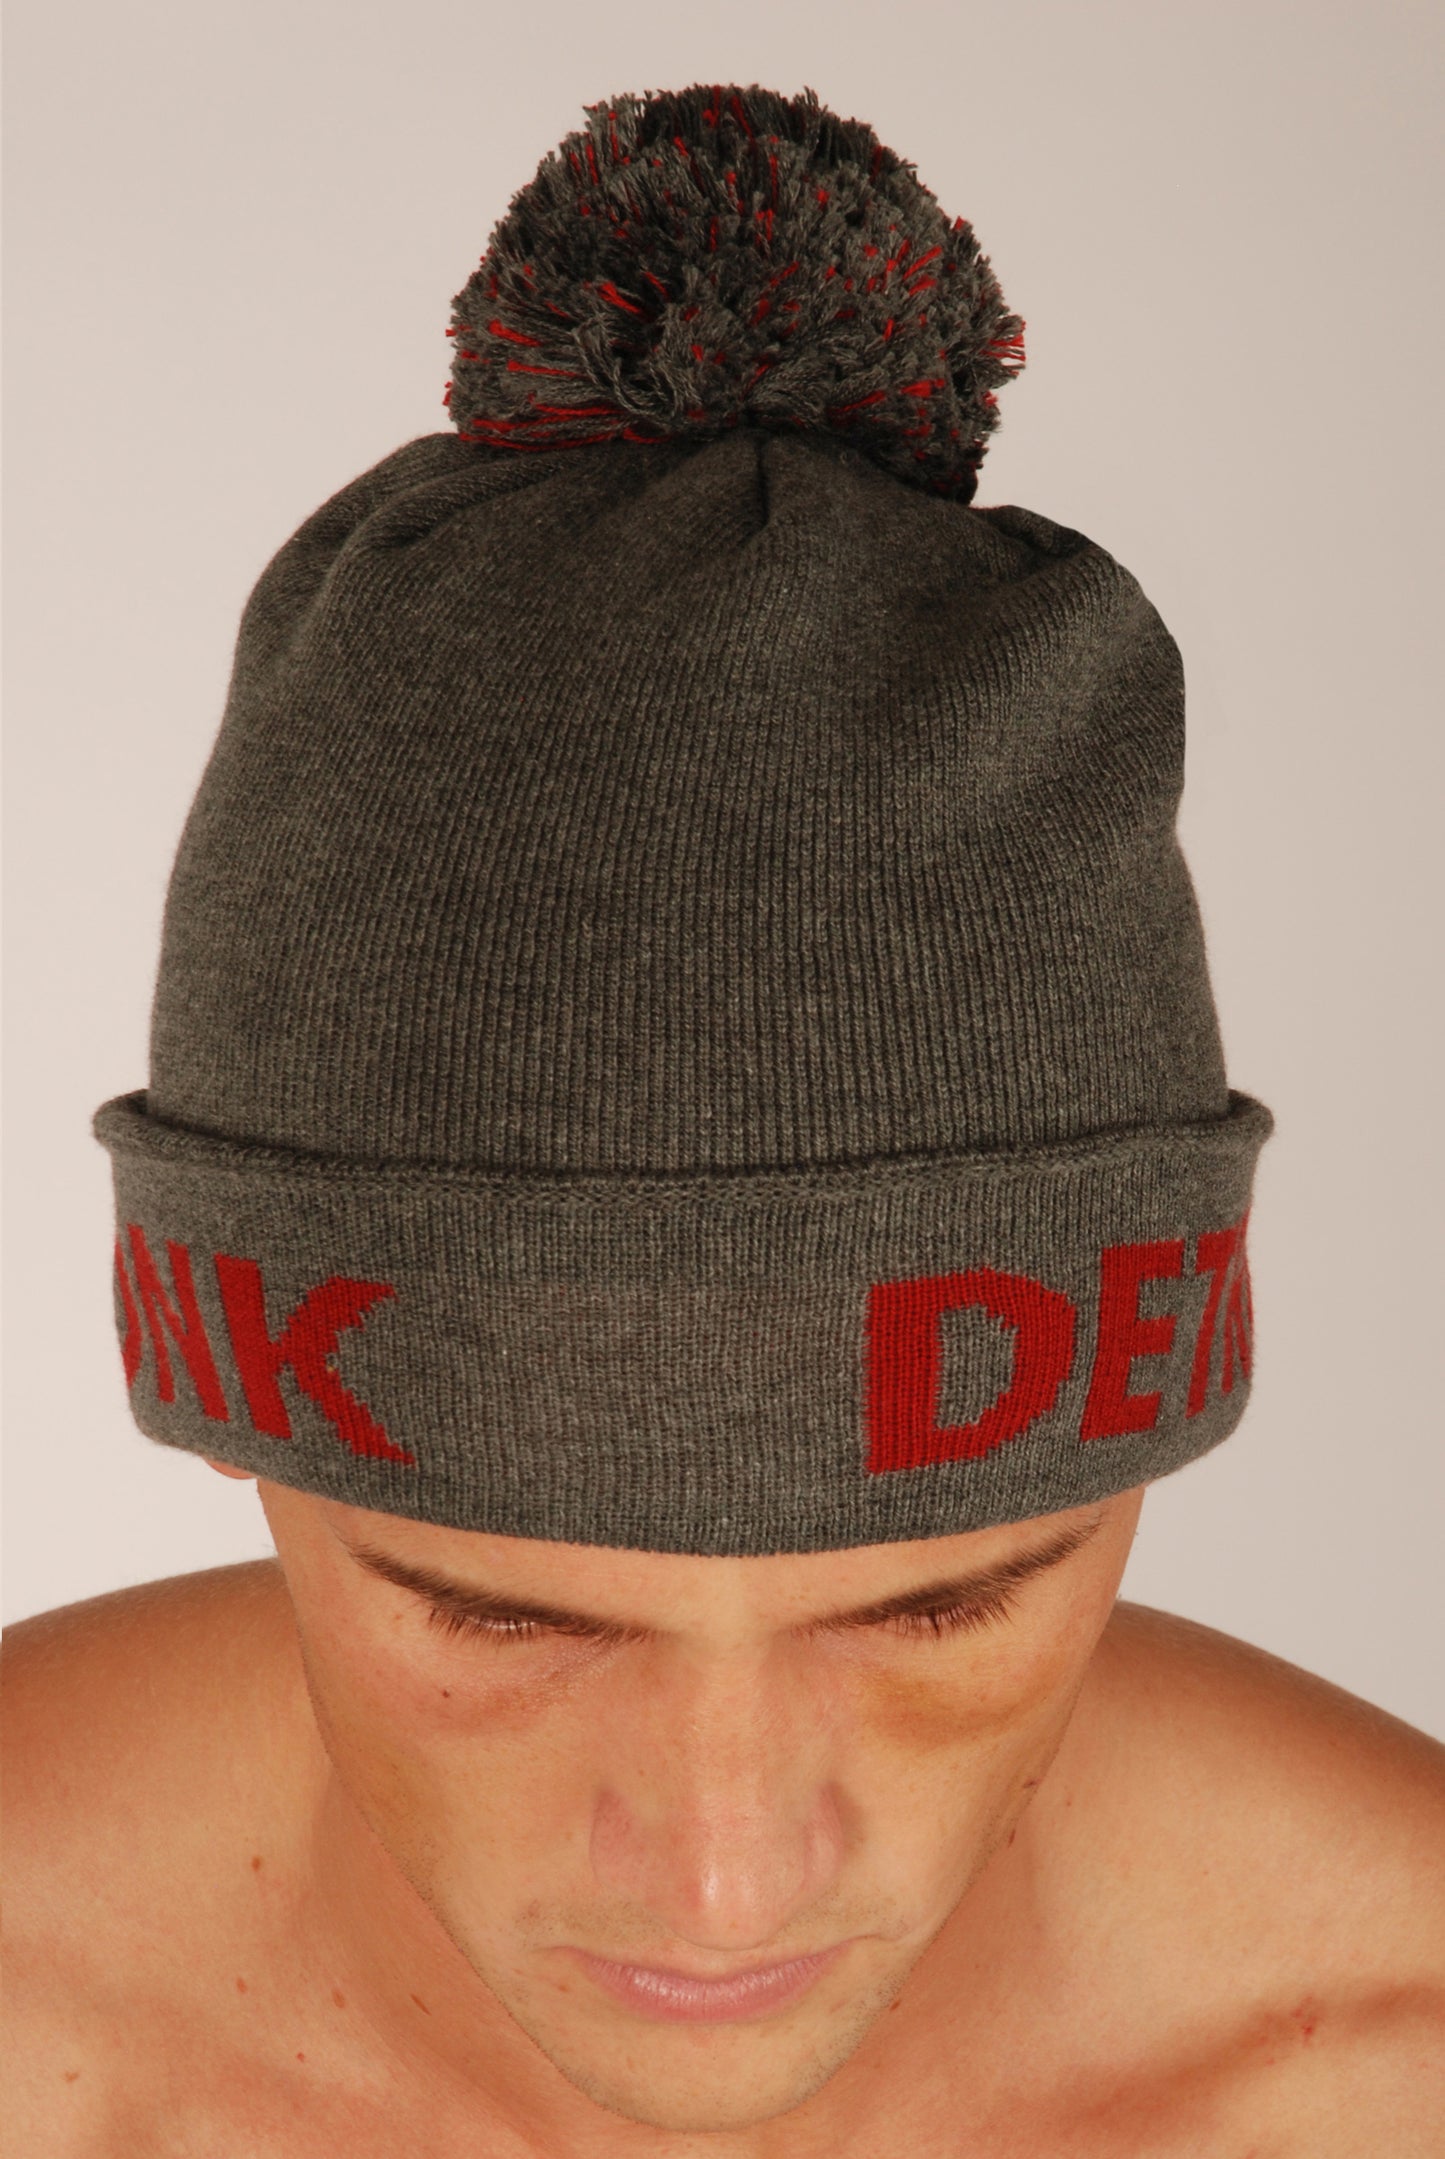 KRONK Detroit Bobble Hat Charcoal with Dark Red knitted logo